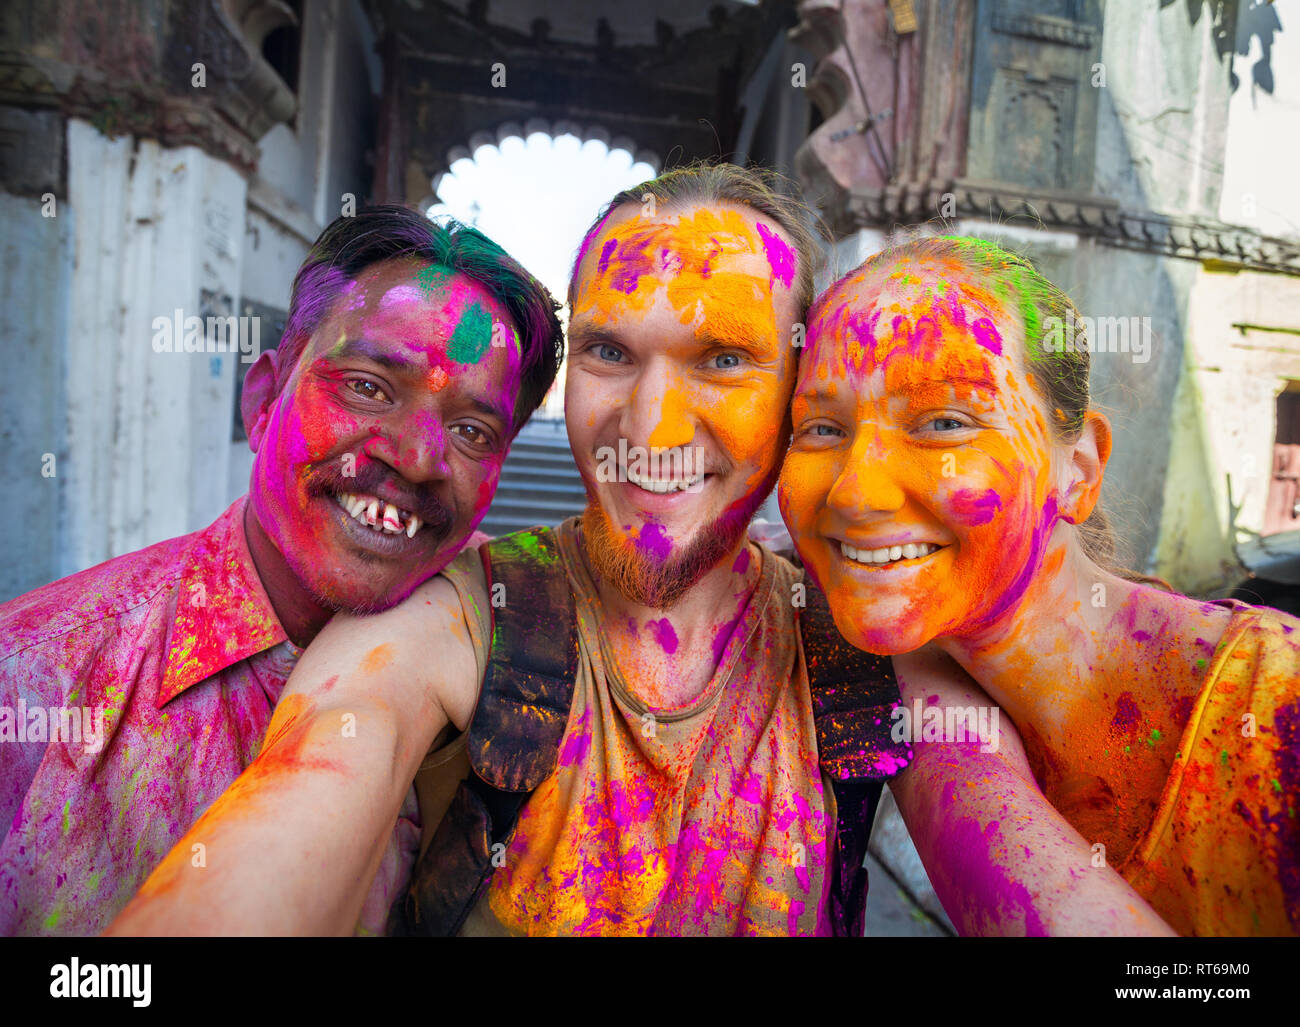 Udaipur, India - March 6, 2015: Selfie photo of Indian man and foreign couple with painted face celebrating the colorful festival of Holi on the stree Stock Photo